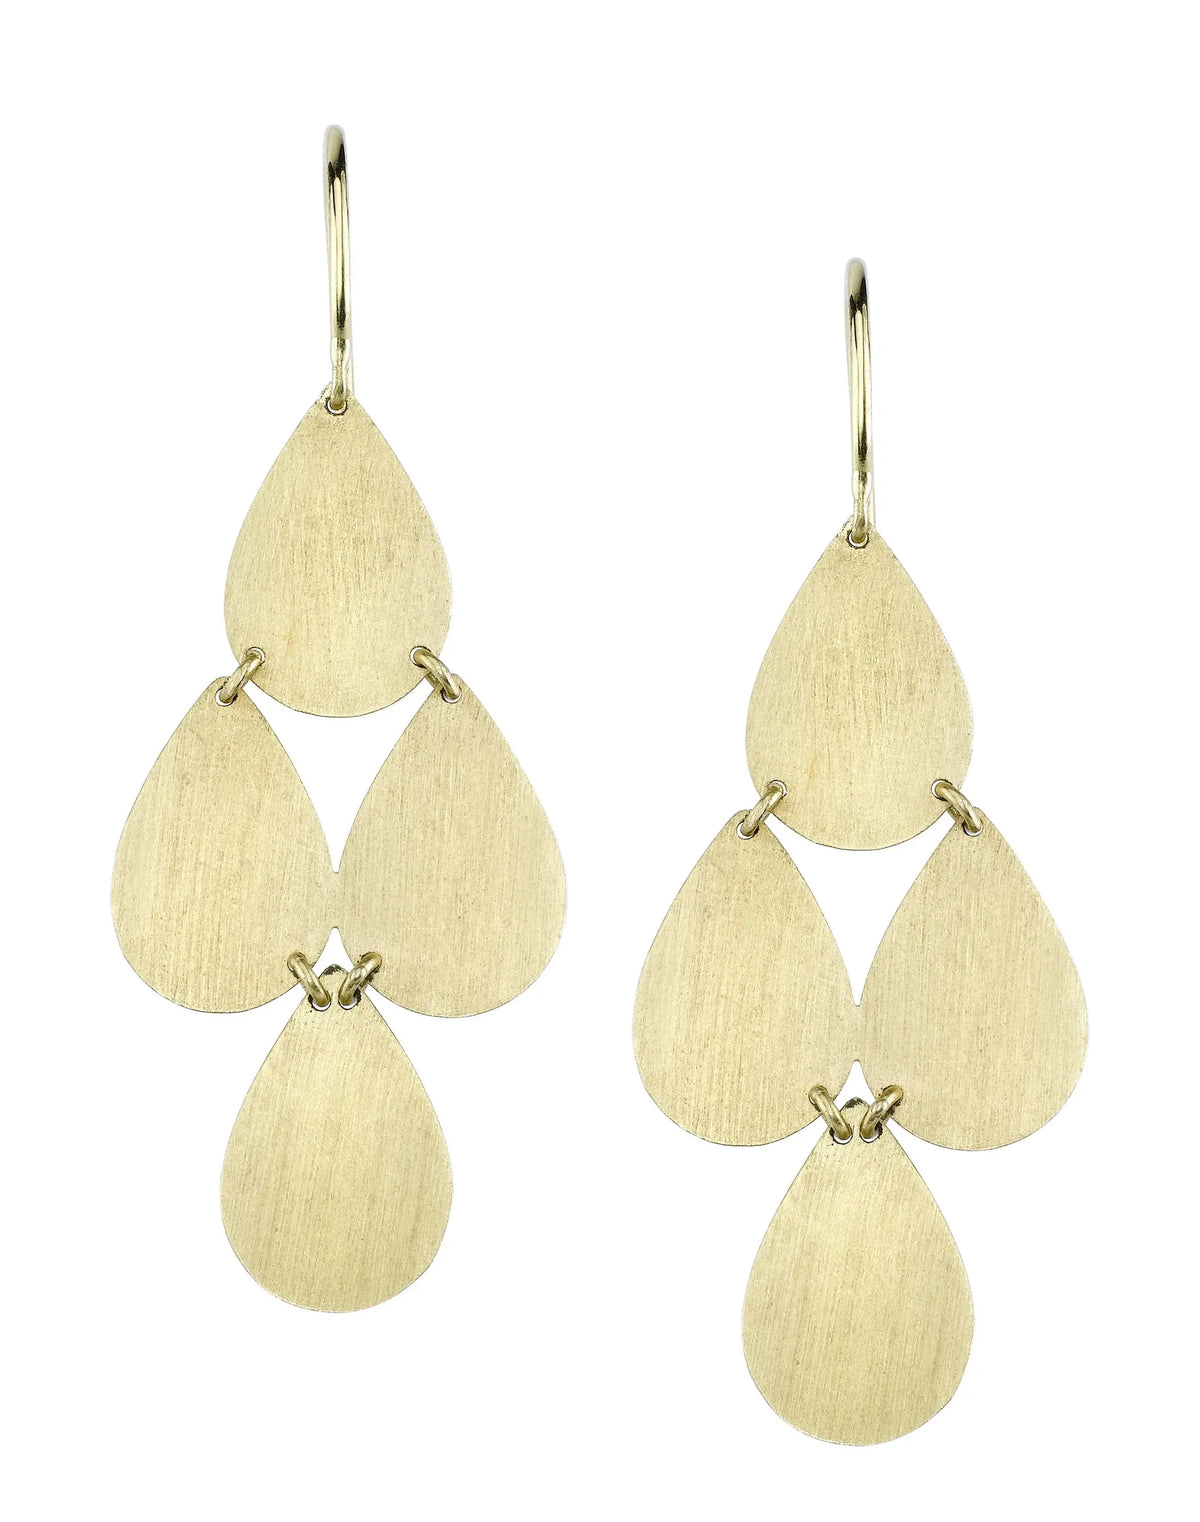 18k yellow gold 4 drop earrings  1.8 inches in length Earring weight 2 grams each Designed and handmade in Los Angeles If an item is out of stock, please allow 3-5 weeks for delivery  Designed by Irene Neuwirth